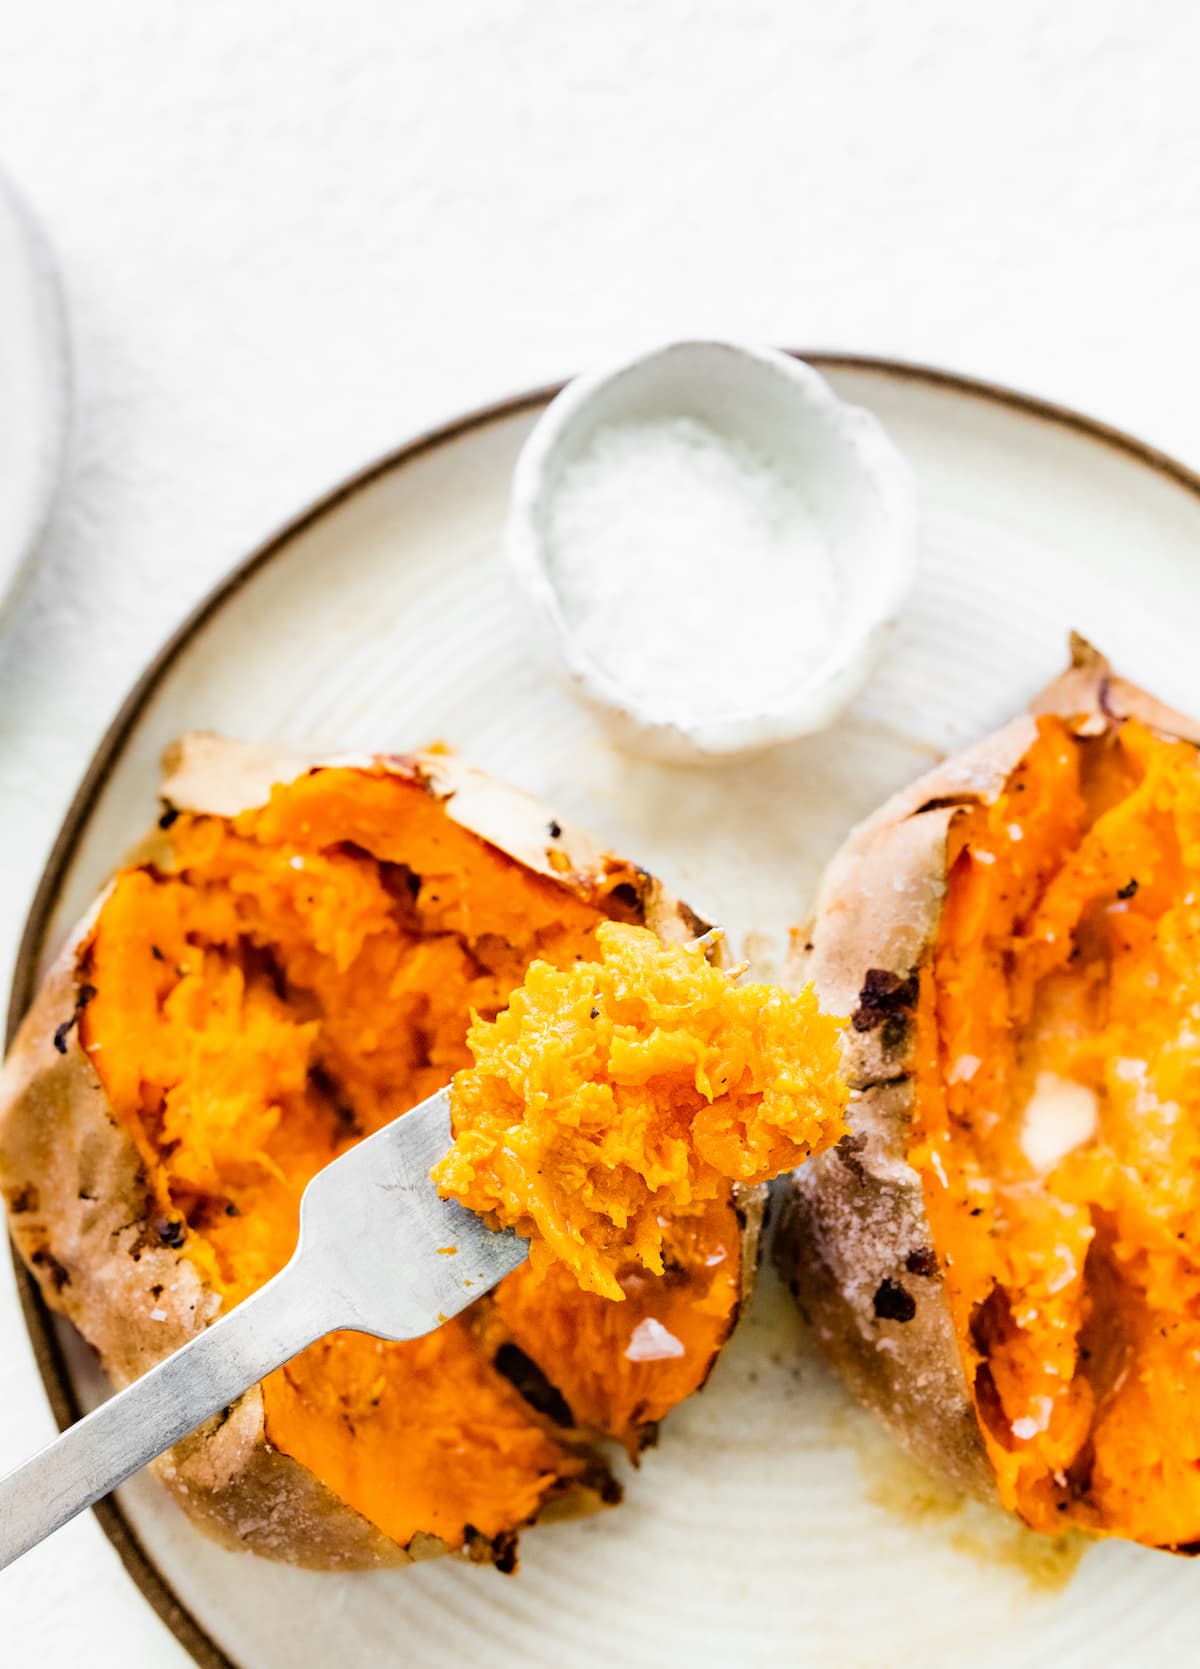 A fork with a small portion of sweet potato that has been air fried.